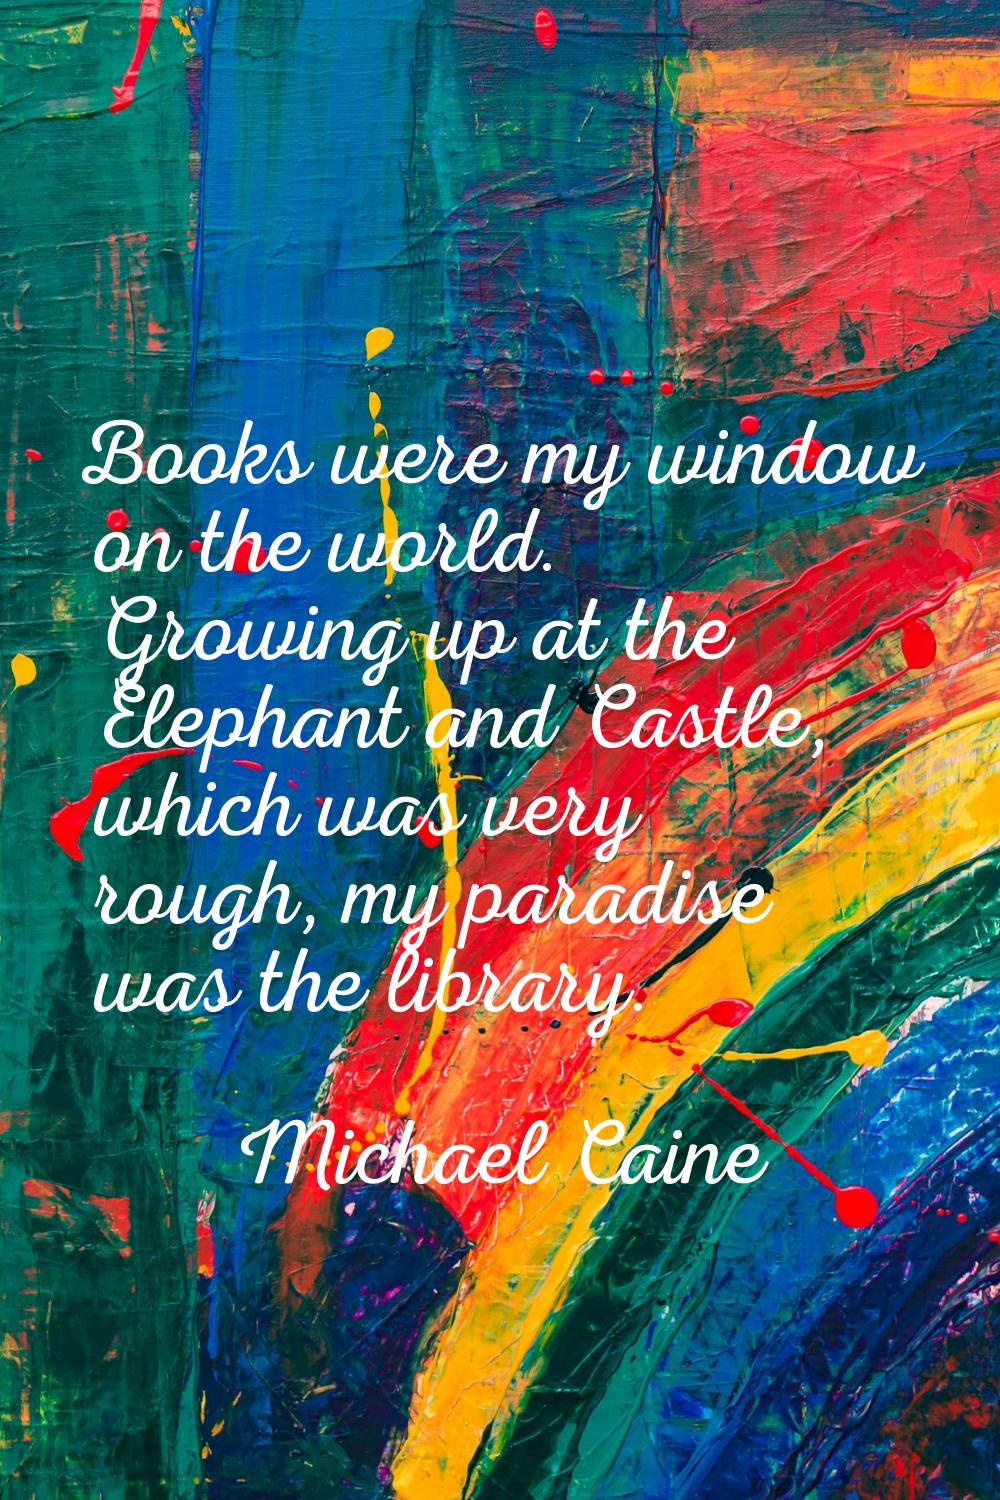 Books were my window on the world. Growing up at the Elephant and Castle, which was very rough, my 